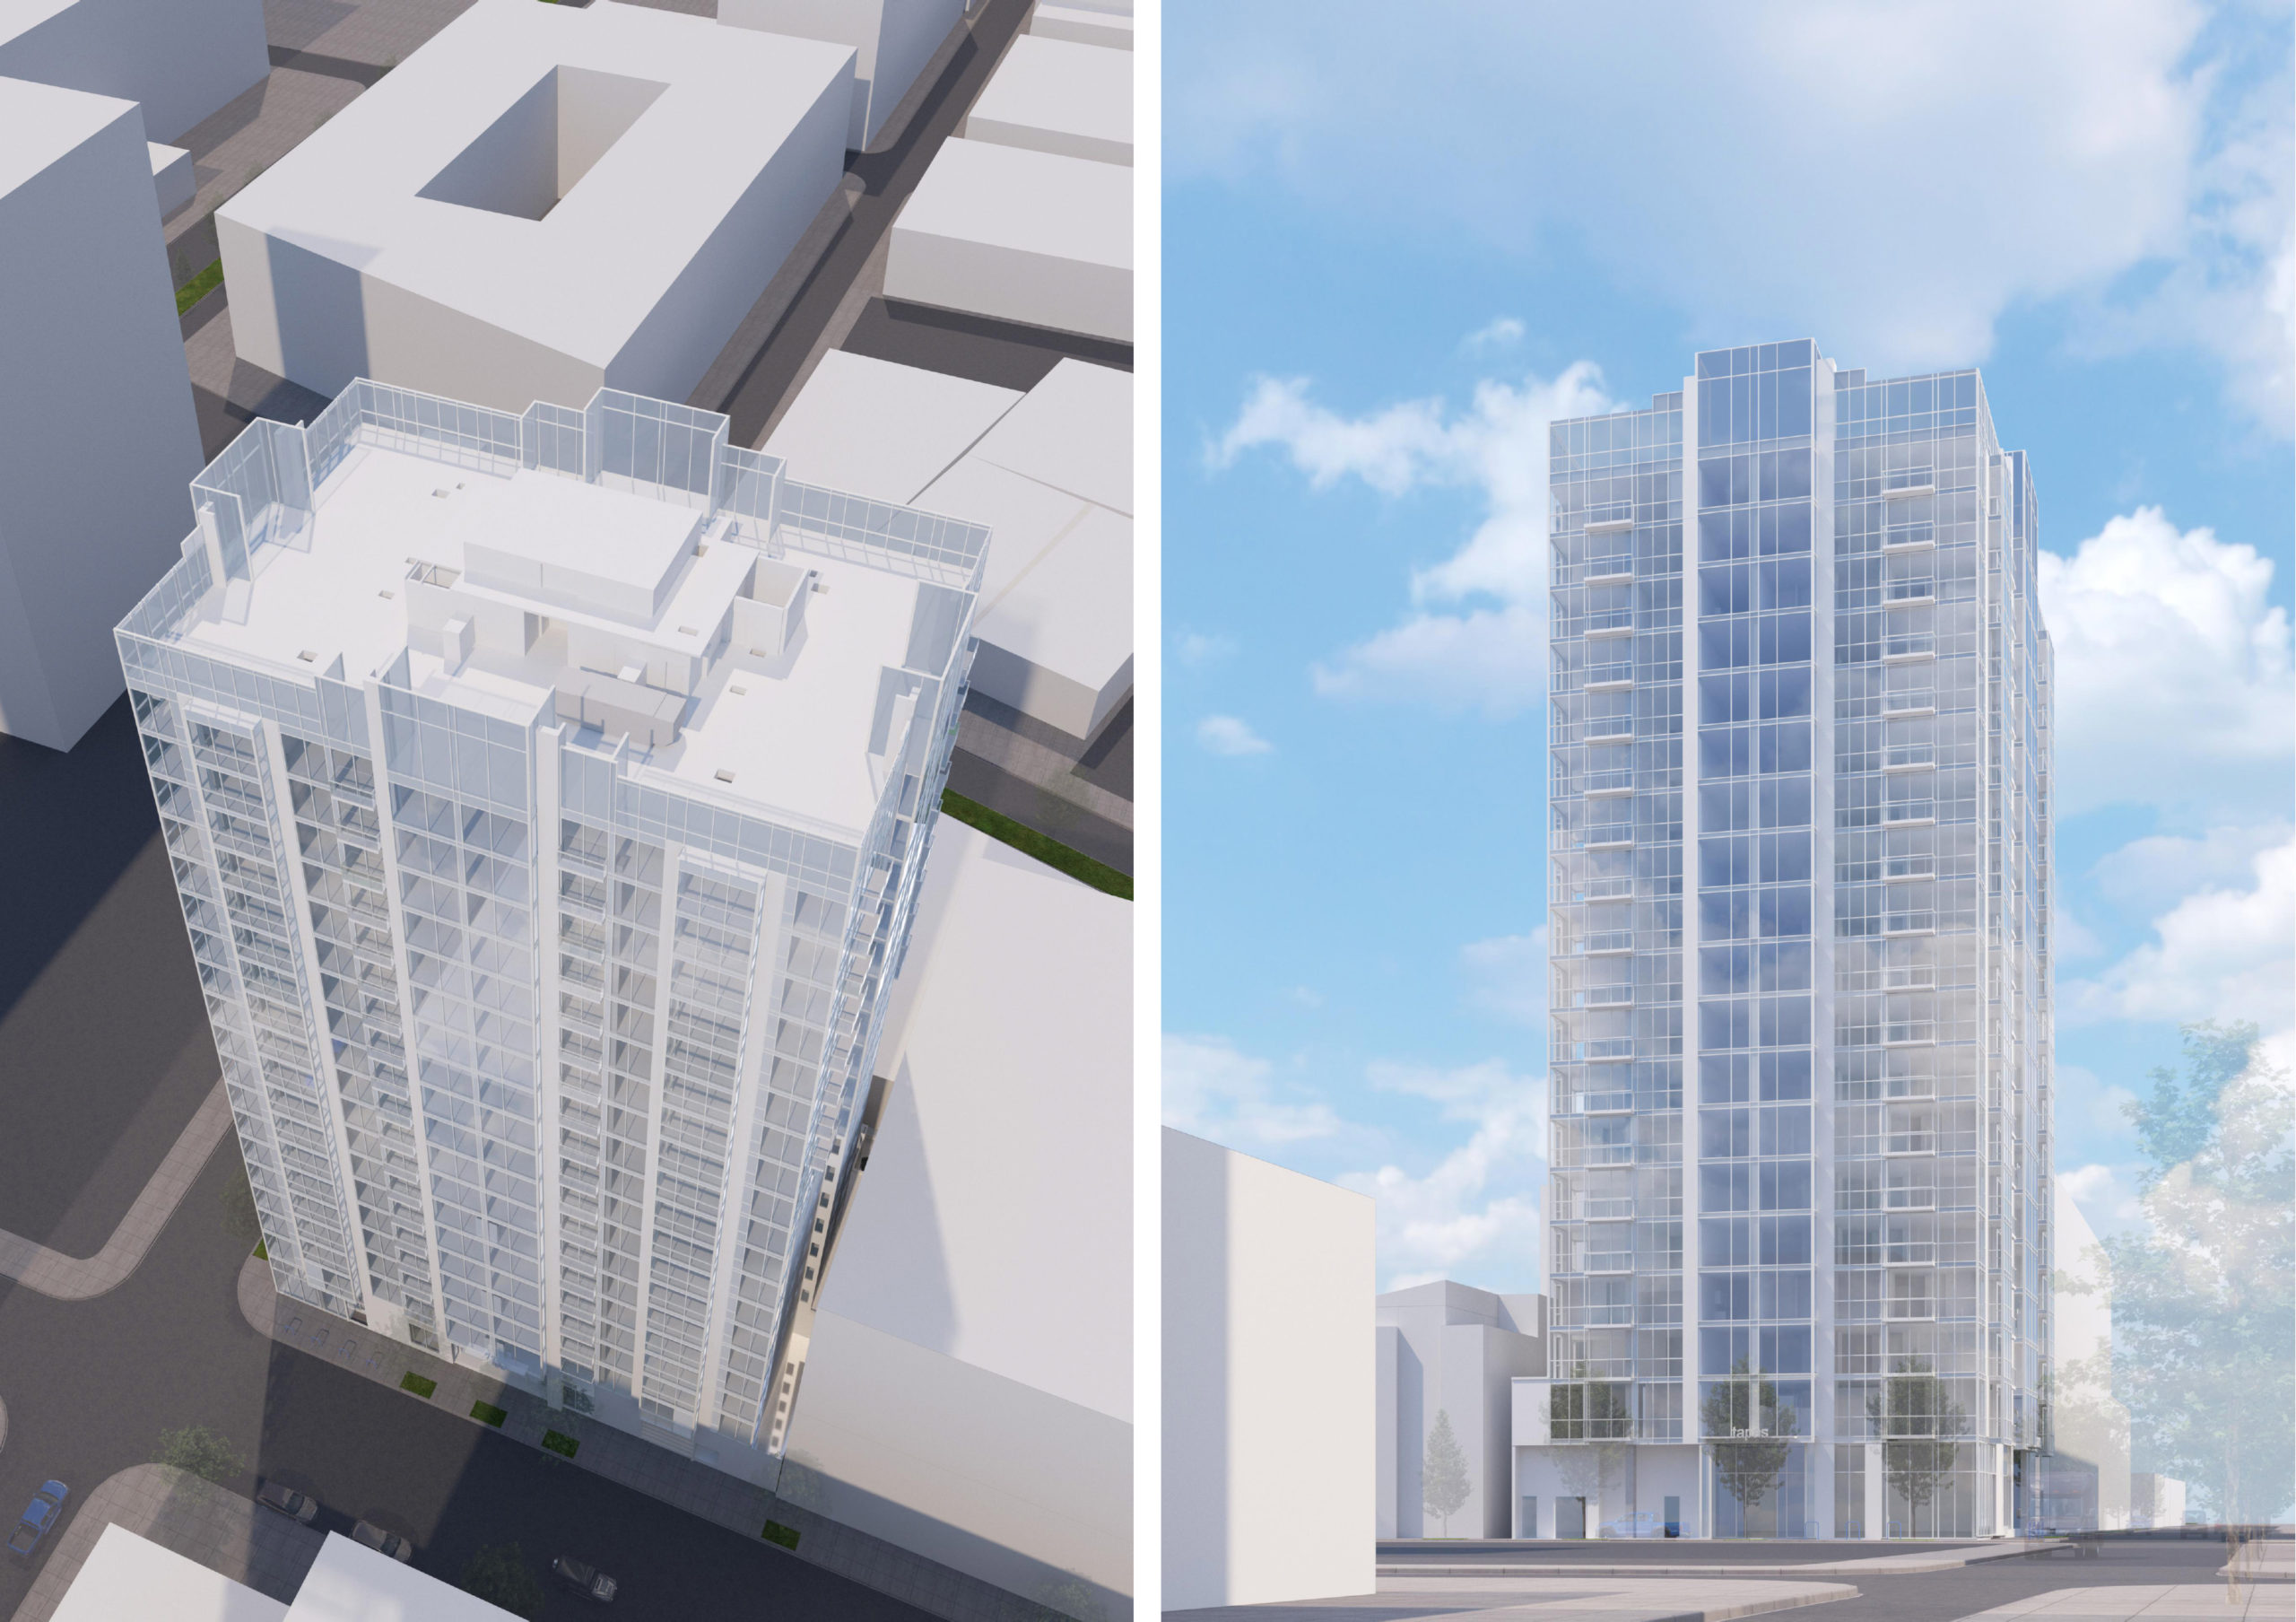 2305 Webster Street aerial view of the east facade (left) and view north on Webster (right), rendering by Ankrom Moisan